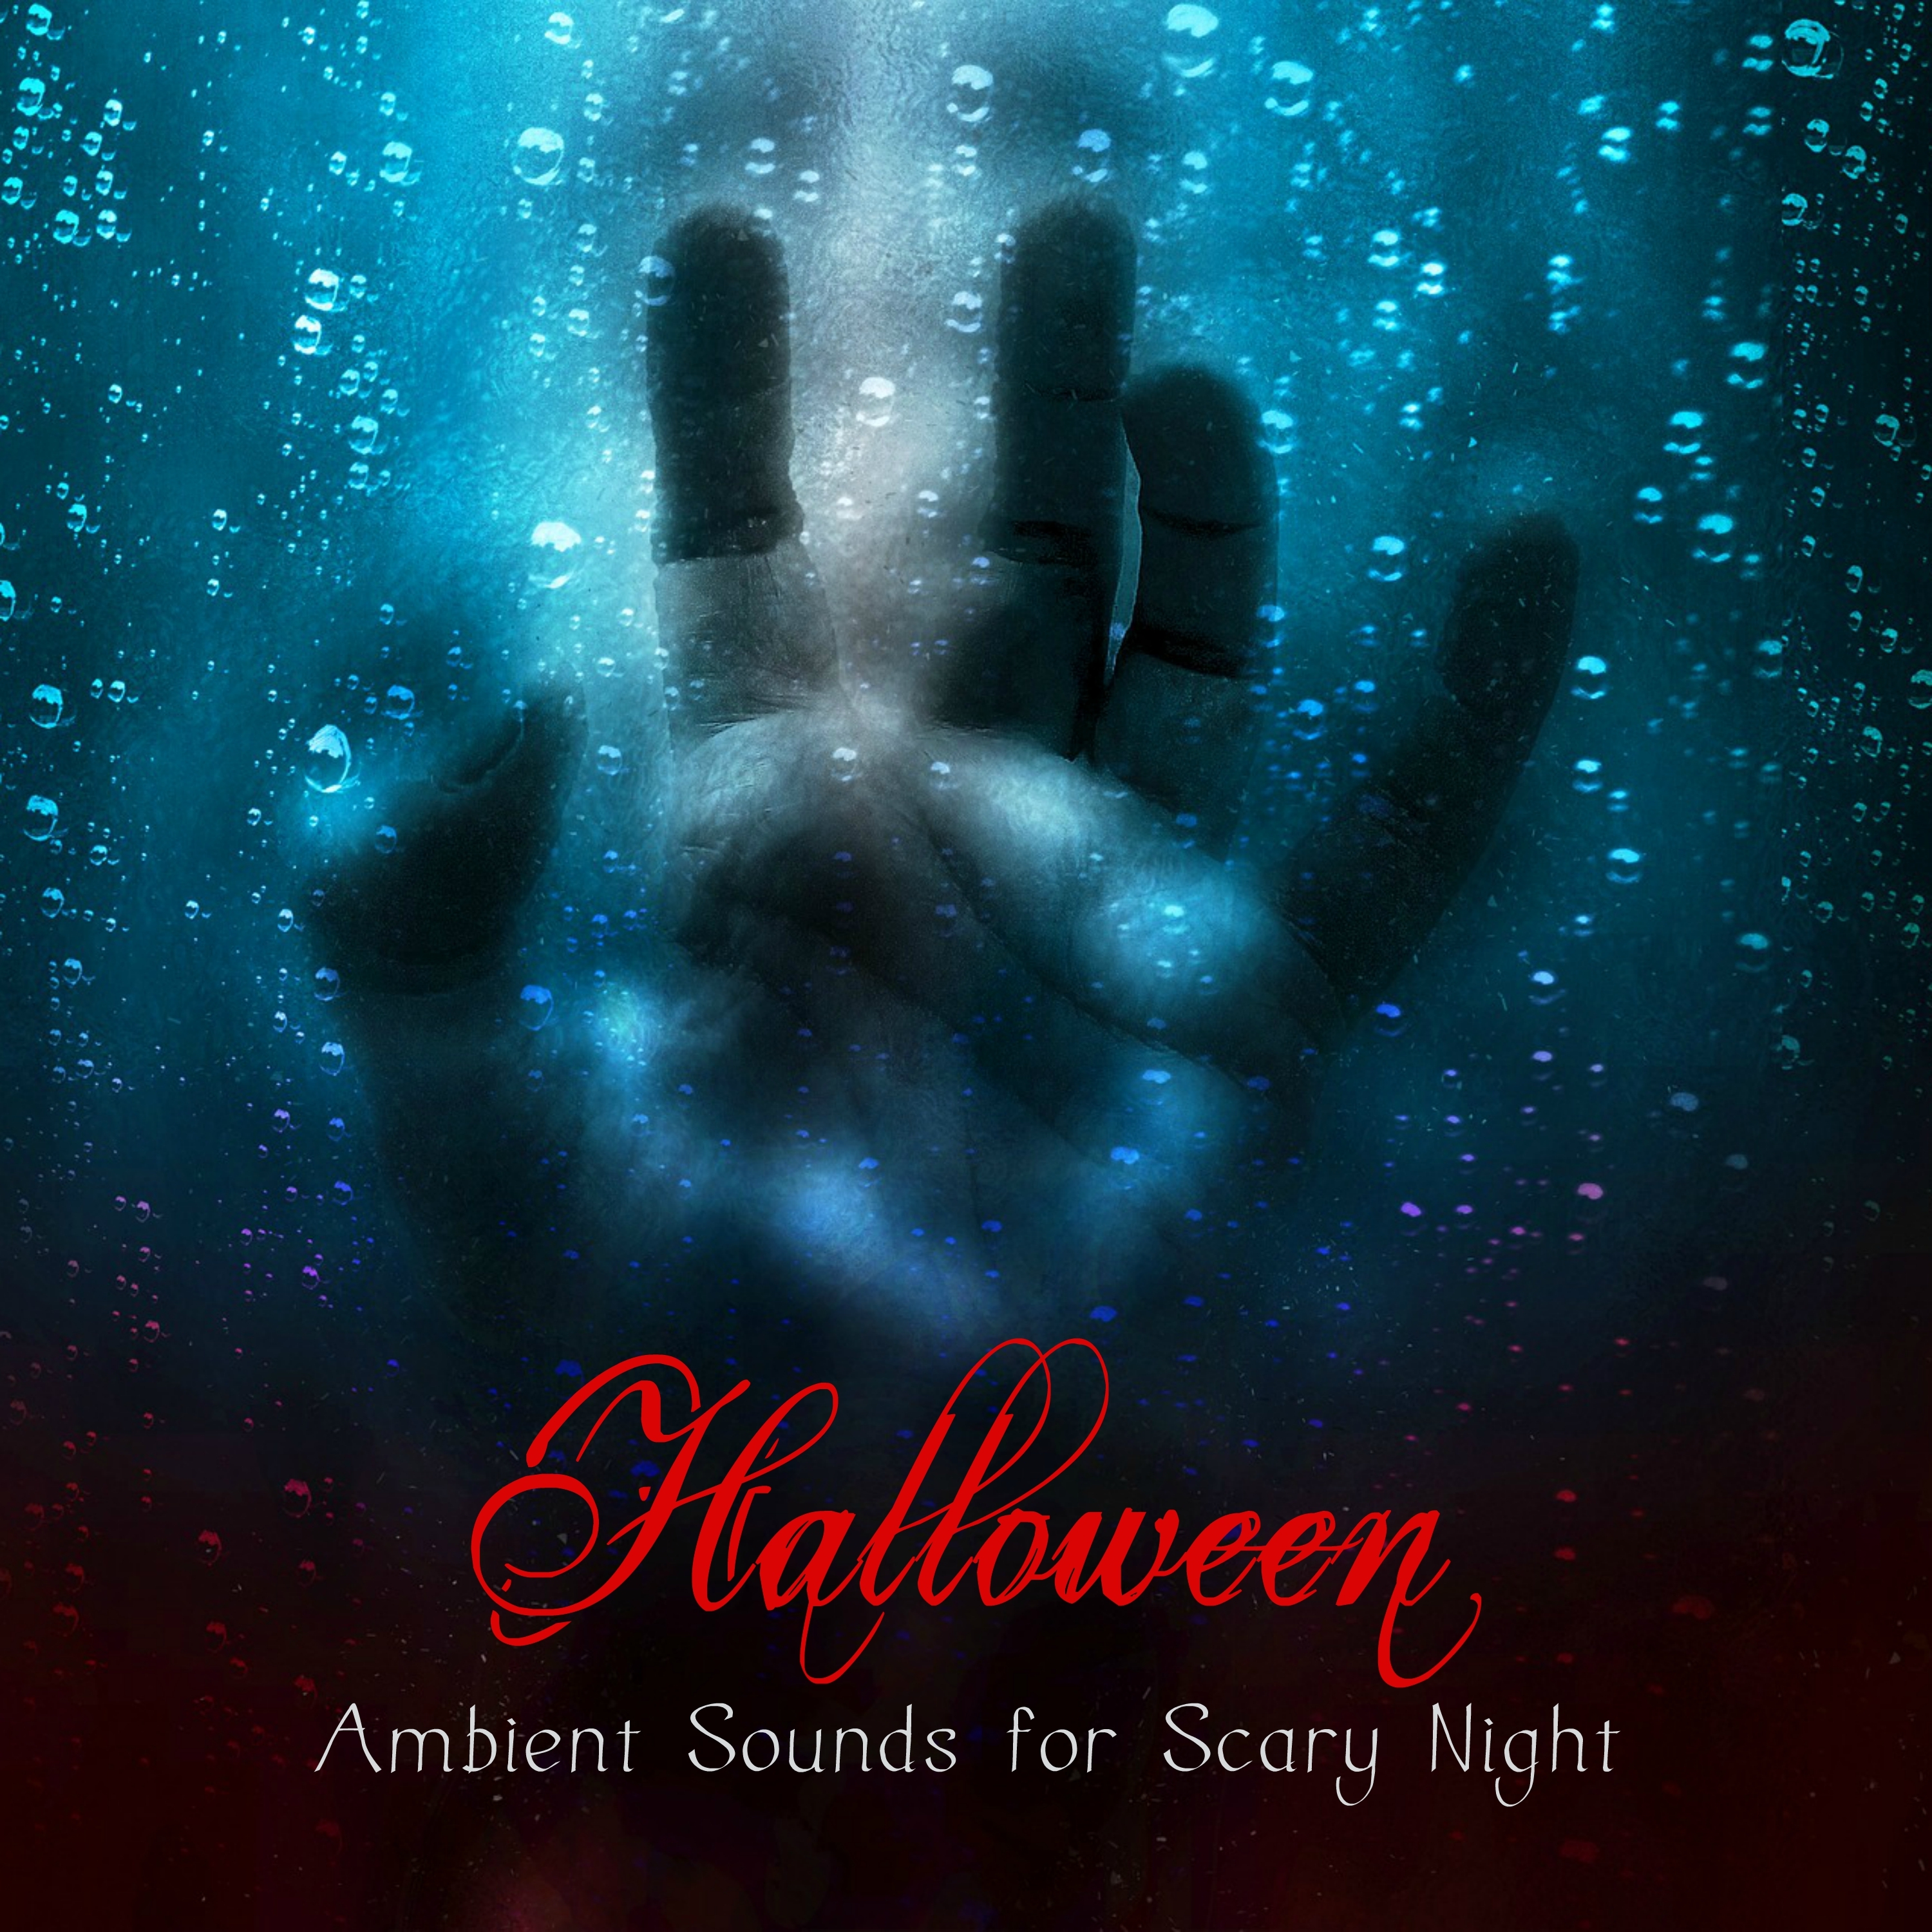 Halloween Ambient Sounds for Scary Night  Creepy Vampire Dark Music, Gothic Music Spooky Halloween Sound Effects